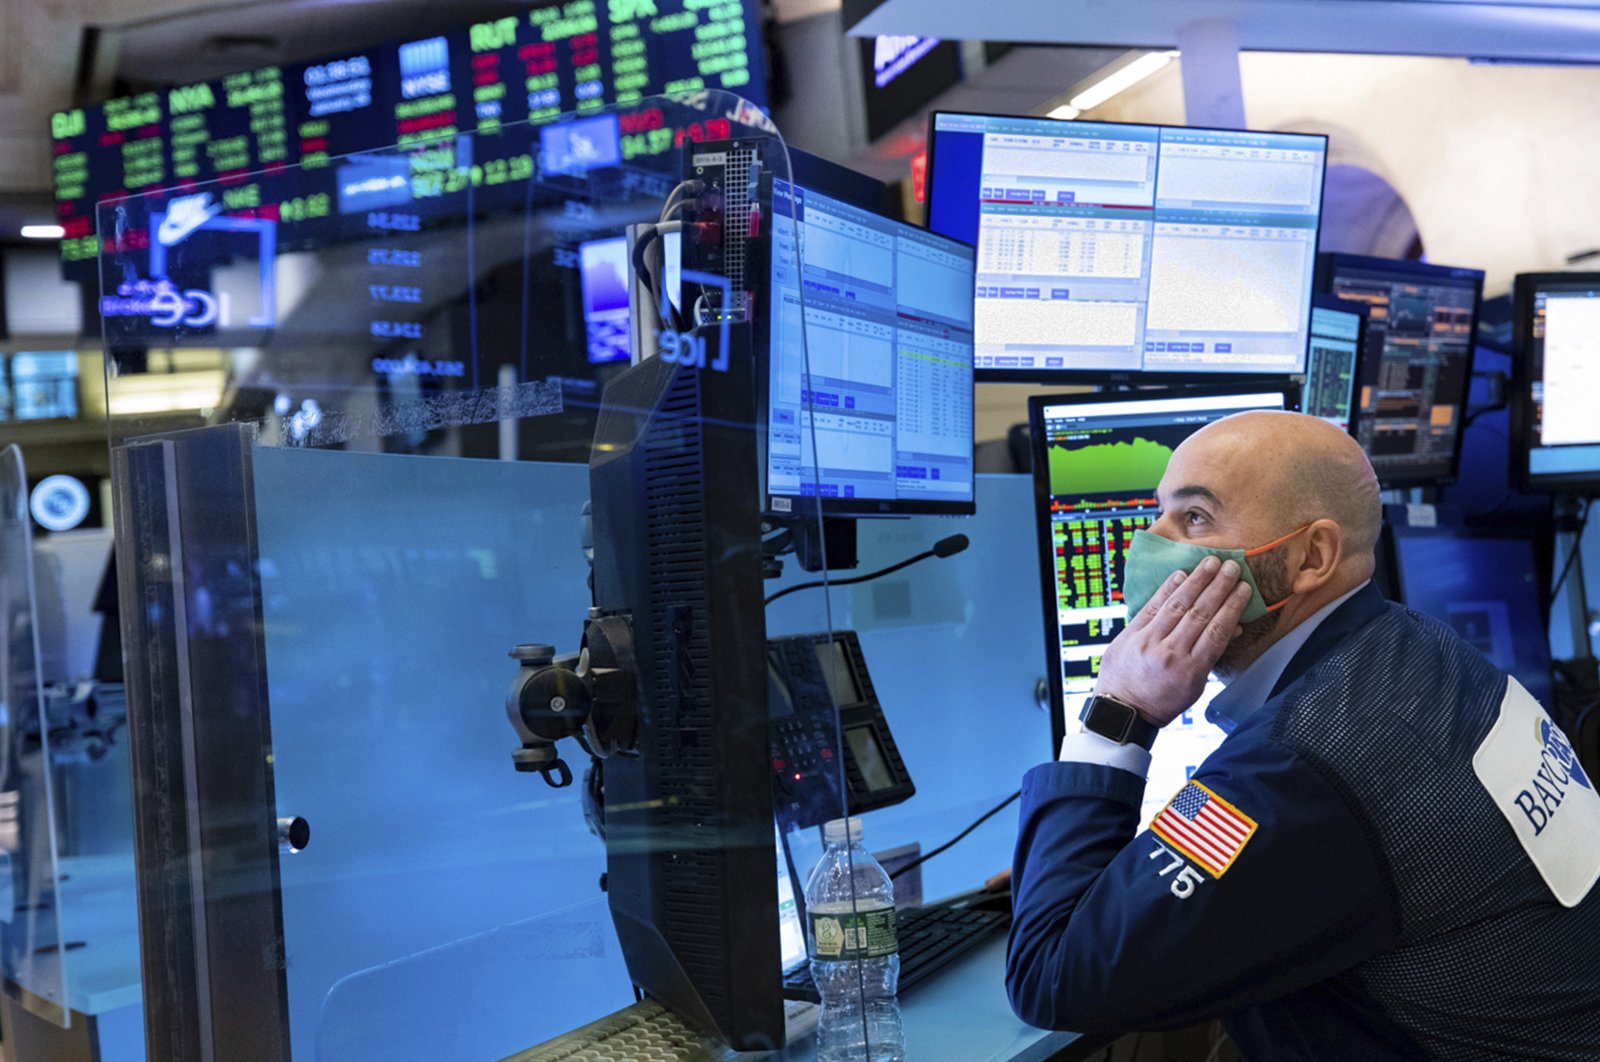 A trader works on the trading floor of the New York Stock Exchange, U.S., Jan. 26, 2022. (AP Photo)